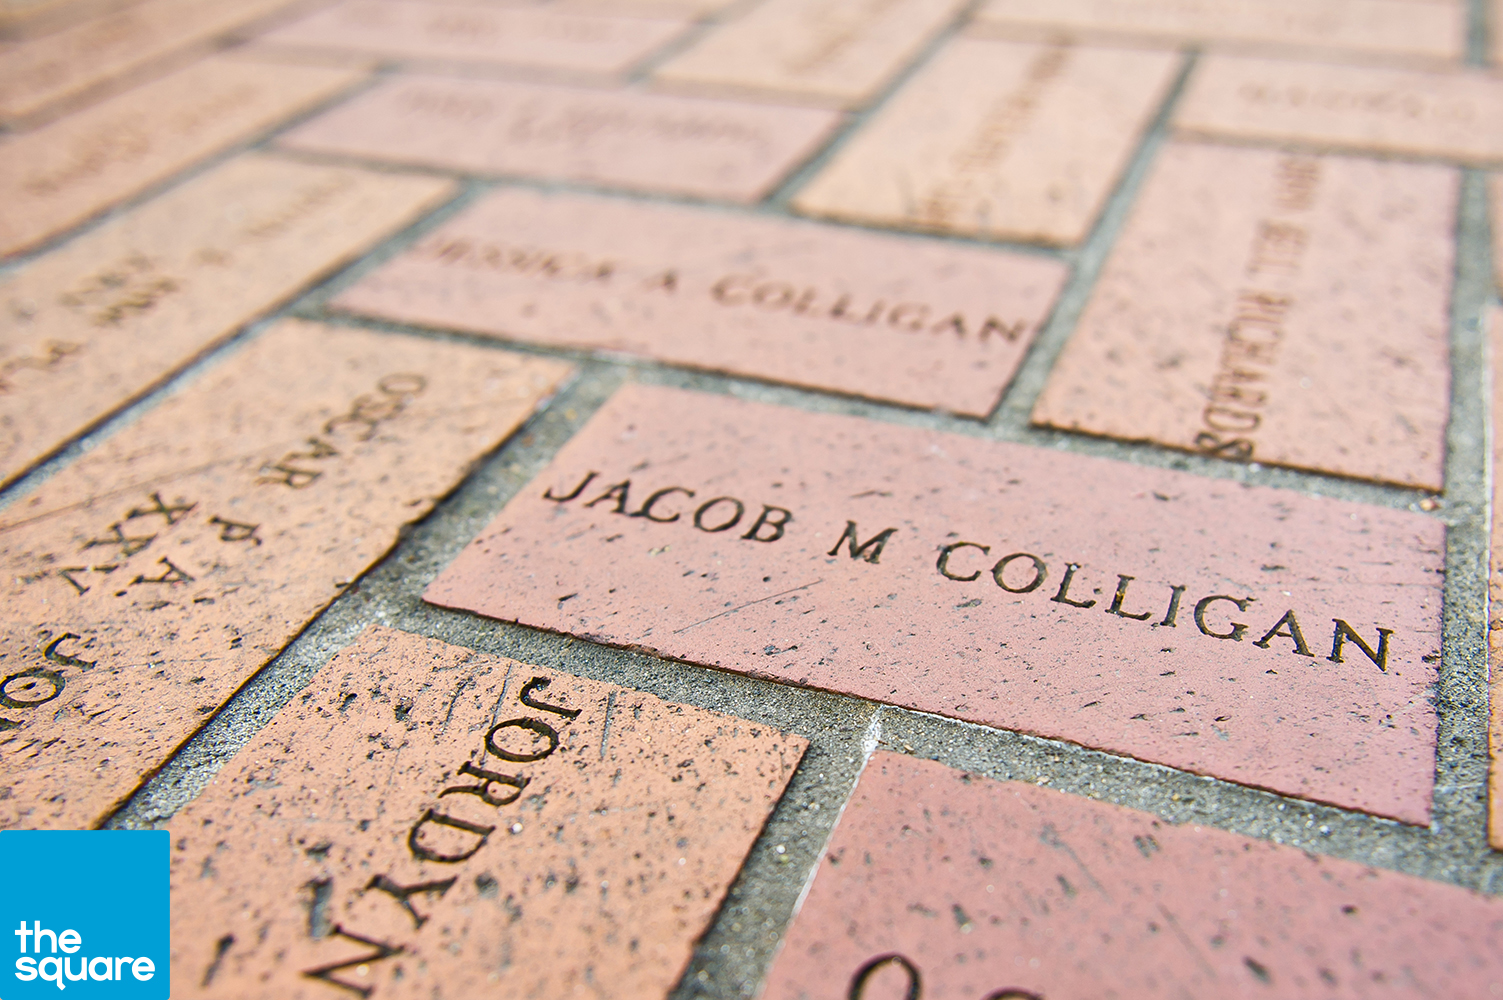 Named Bricks - The named bricks, which pave the Square's surface, were purchased by citizens and local businesses to raise money to build and maintain the Square. There are more than 72,430 named bricks currently in the Square. Famous bricks located in the Square are: Elvis Presley, Jimi Hendrix, Dan Rather, Sherlock Holmes, George Washington, and even Mr. Bill.